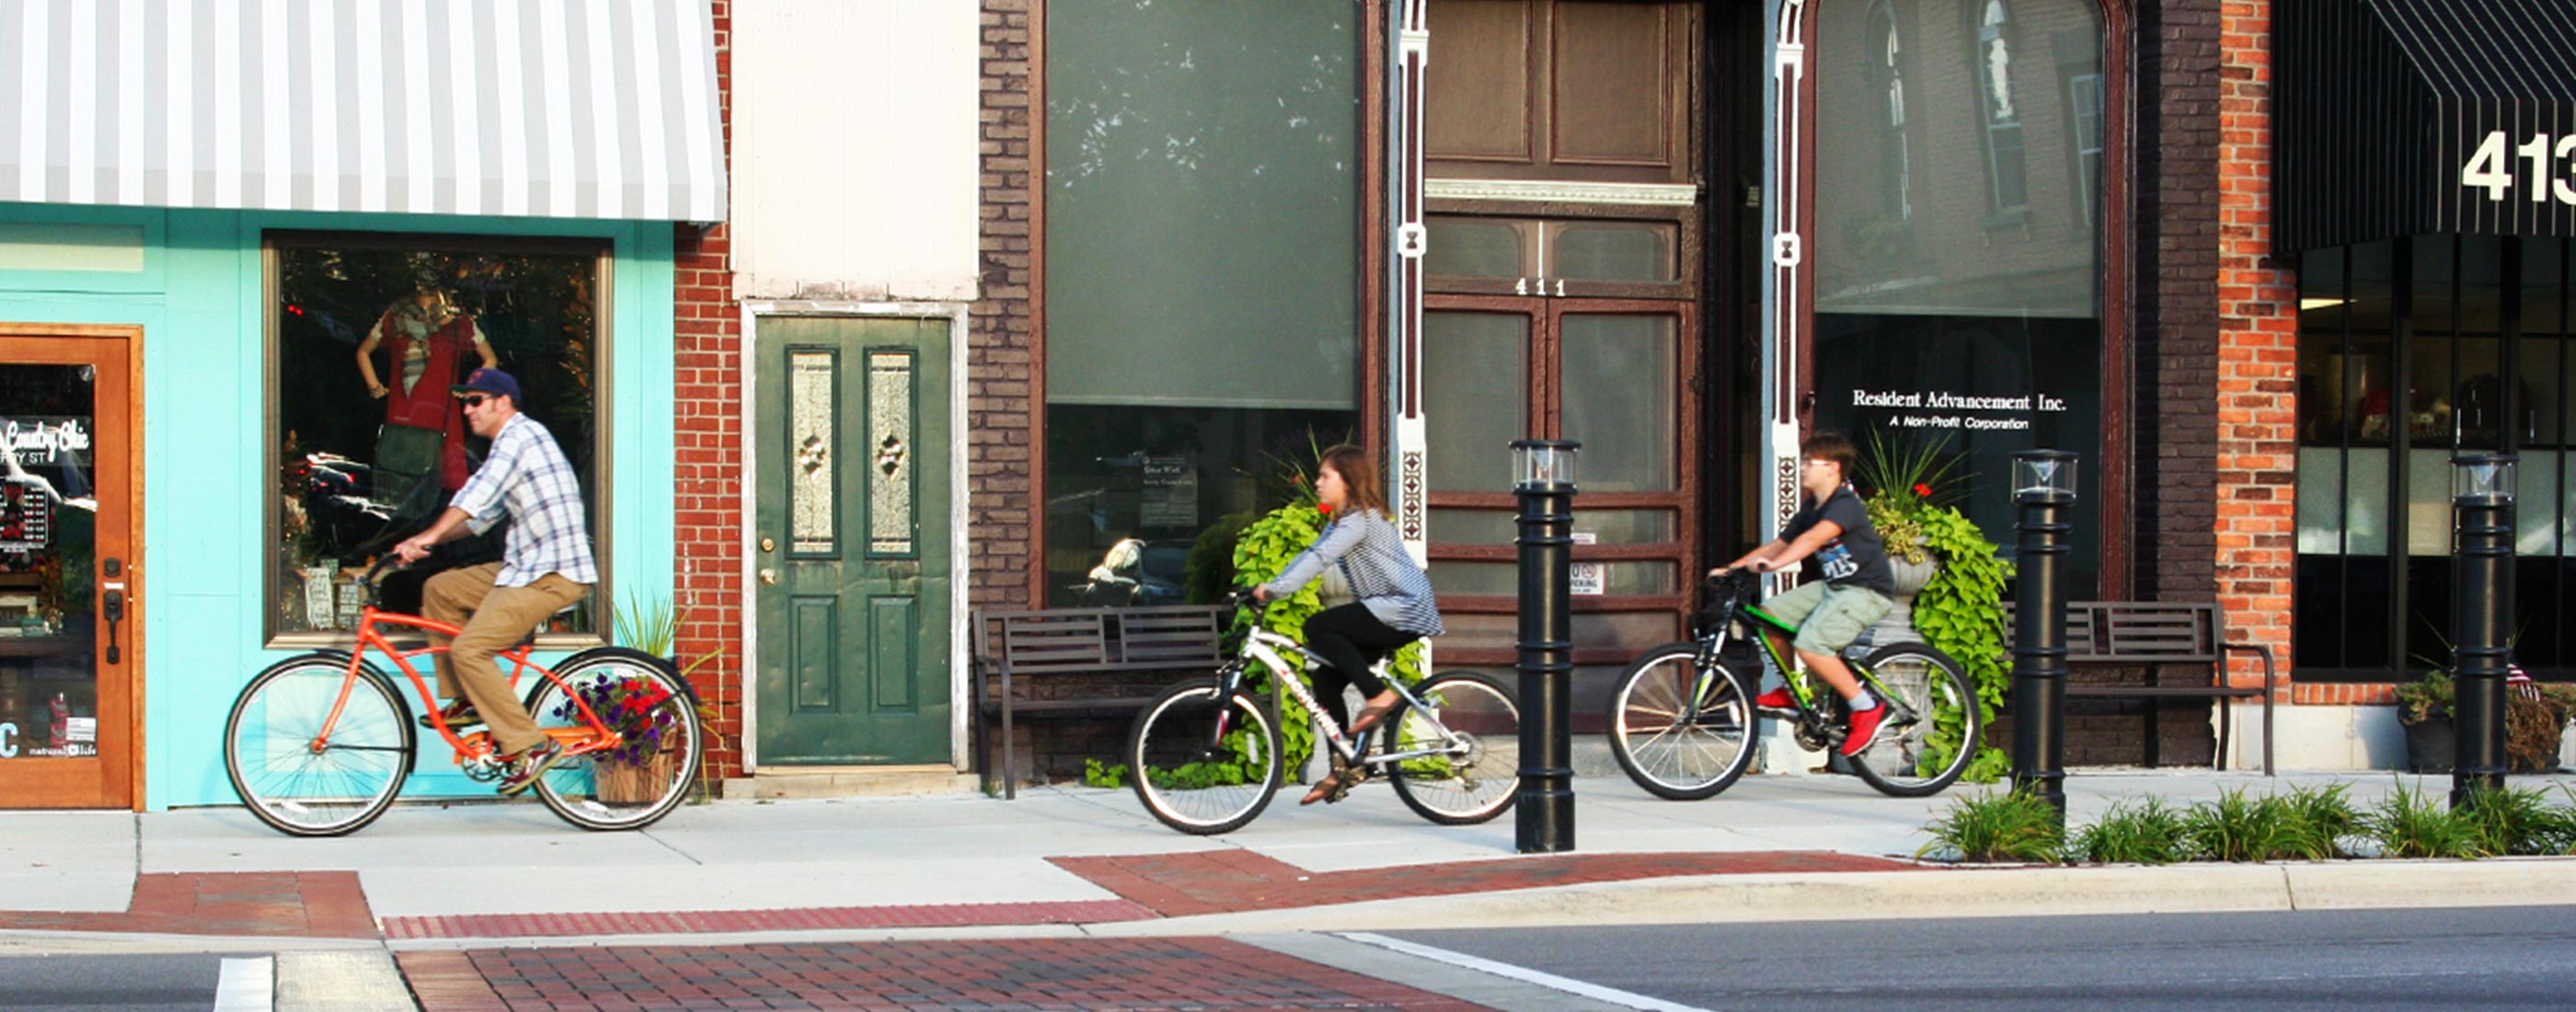 A family enjoys a bike ride along Fenton, Michigan’s new downtown streetscape, a project led by OHM Advisors.